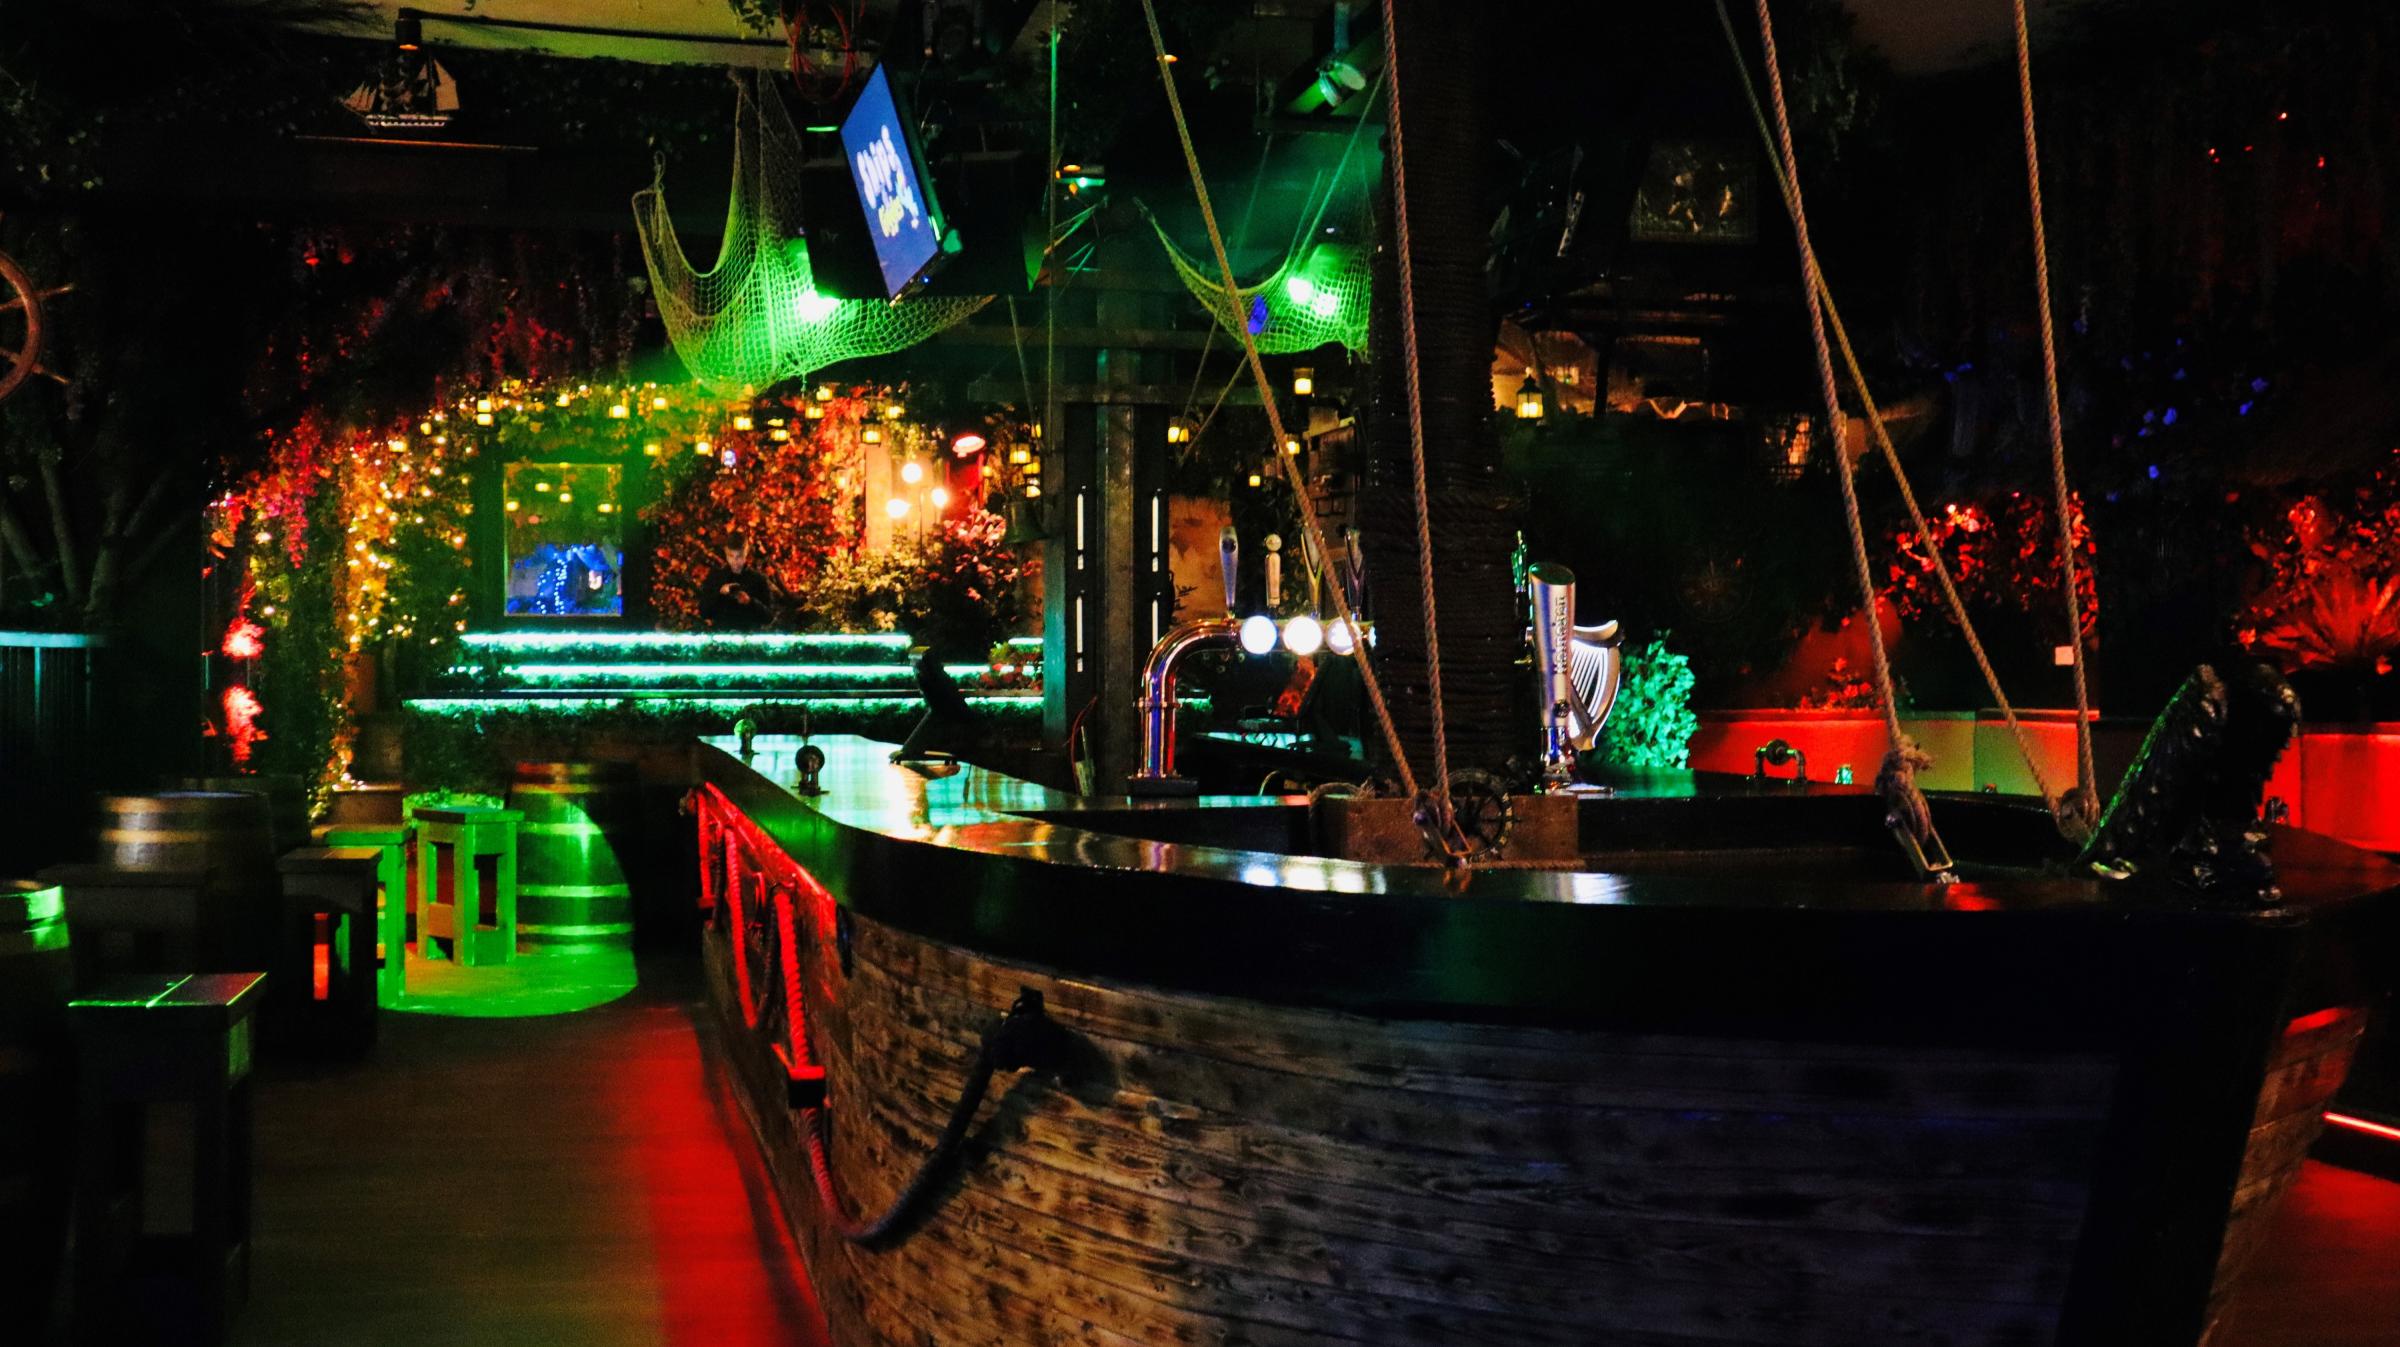 The bar is in the shape of a pirate ship